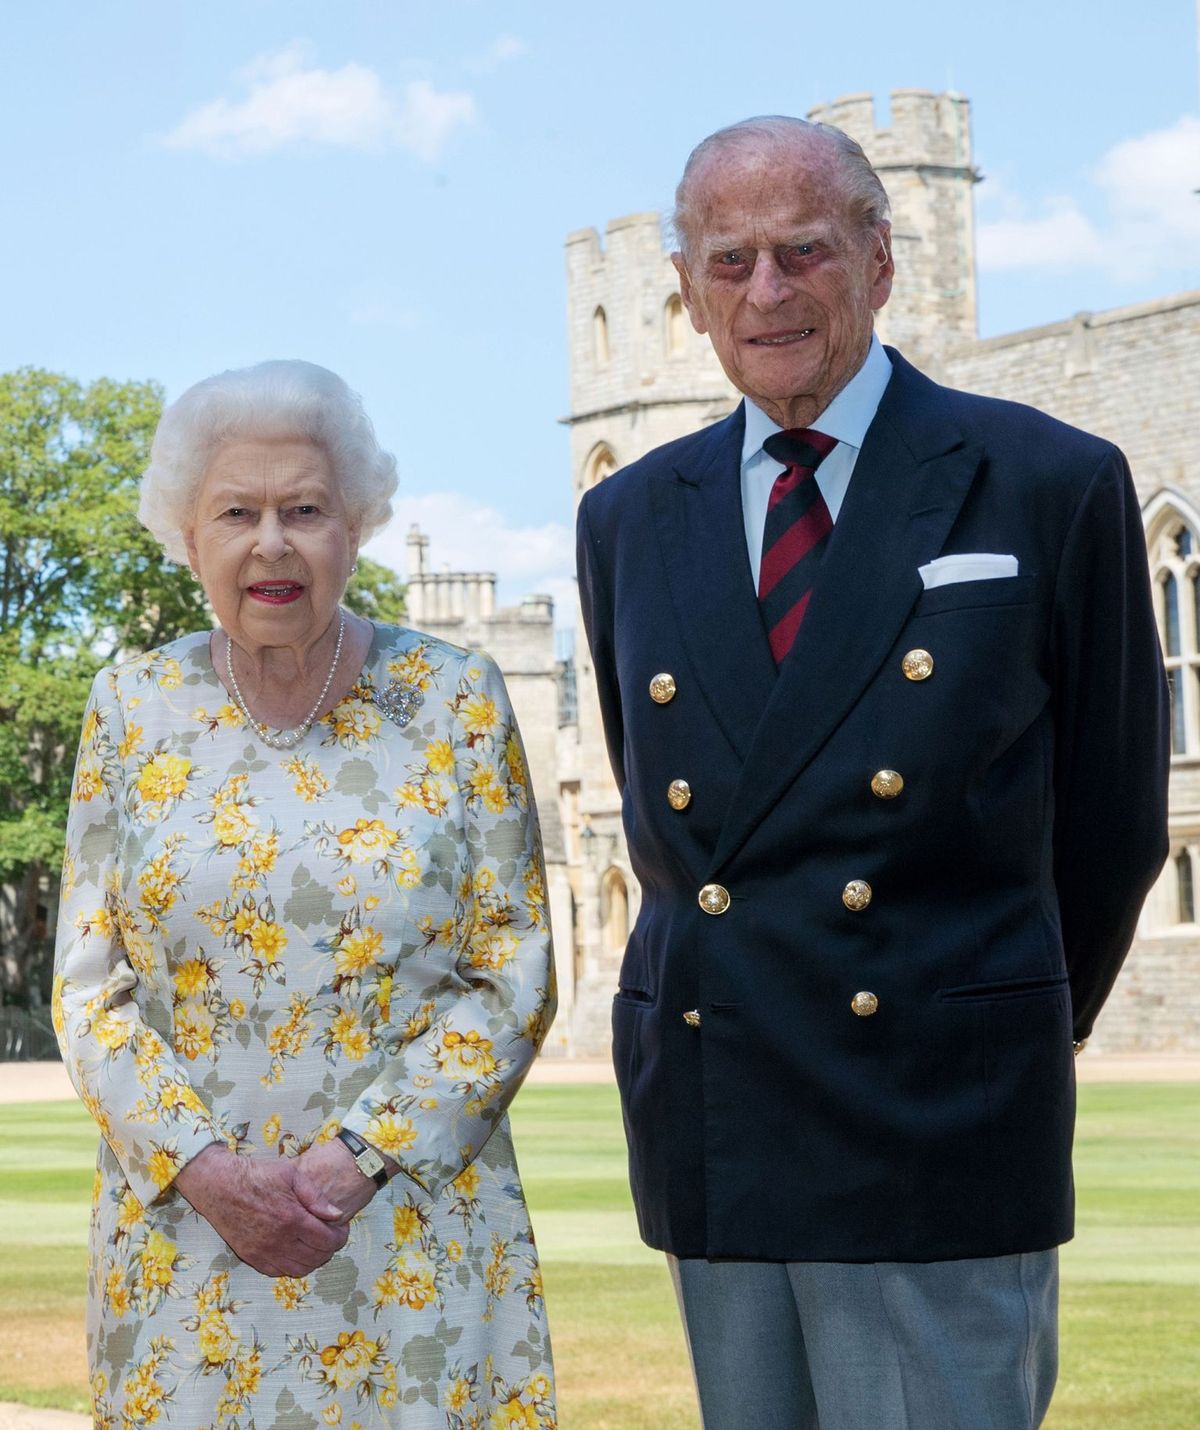 Queen Elizabeth II and Prince Philip pictured 1/6/2020 in the quadrangle of Windsor Castle ahead of his 99th birthday. | Getty Images